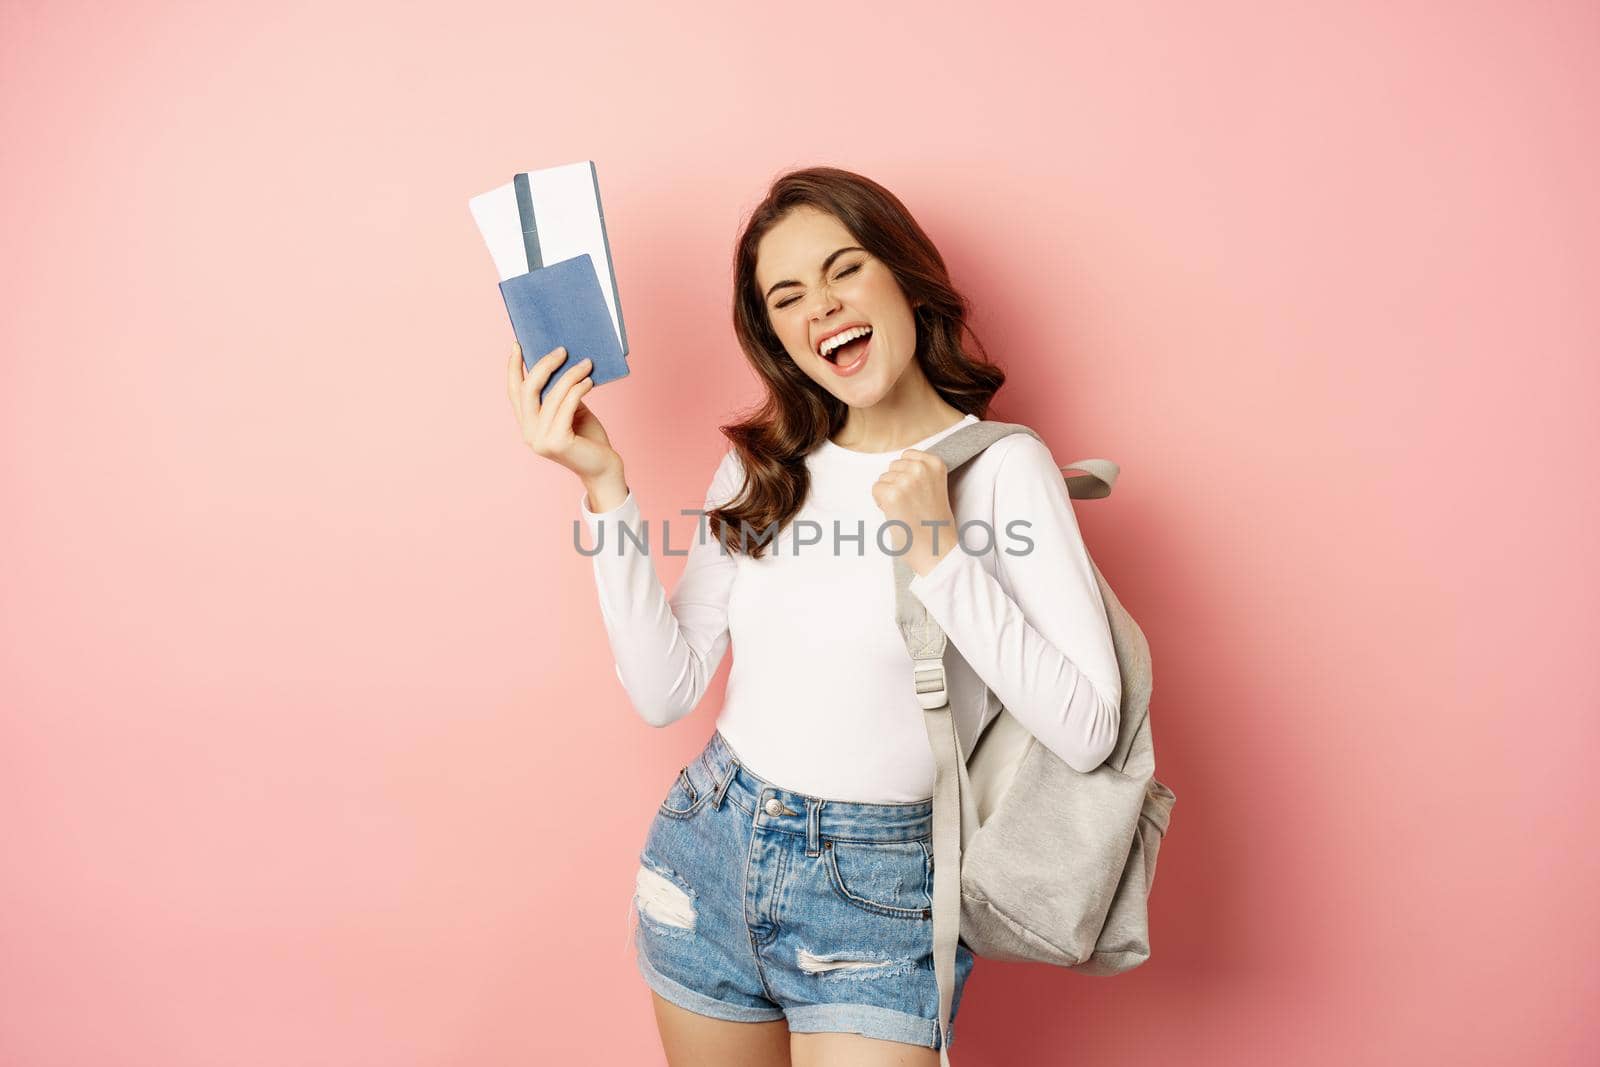 Vacation and holiday. Beautiful girl going on trip, holding passport with airplane tickets, holding backpack, travelling, standing over pink background.